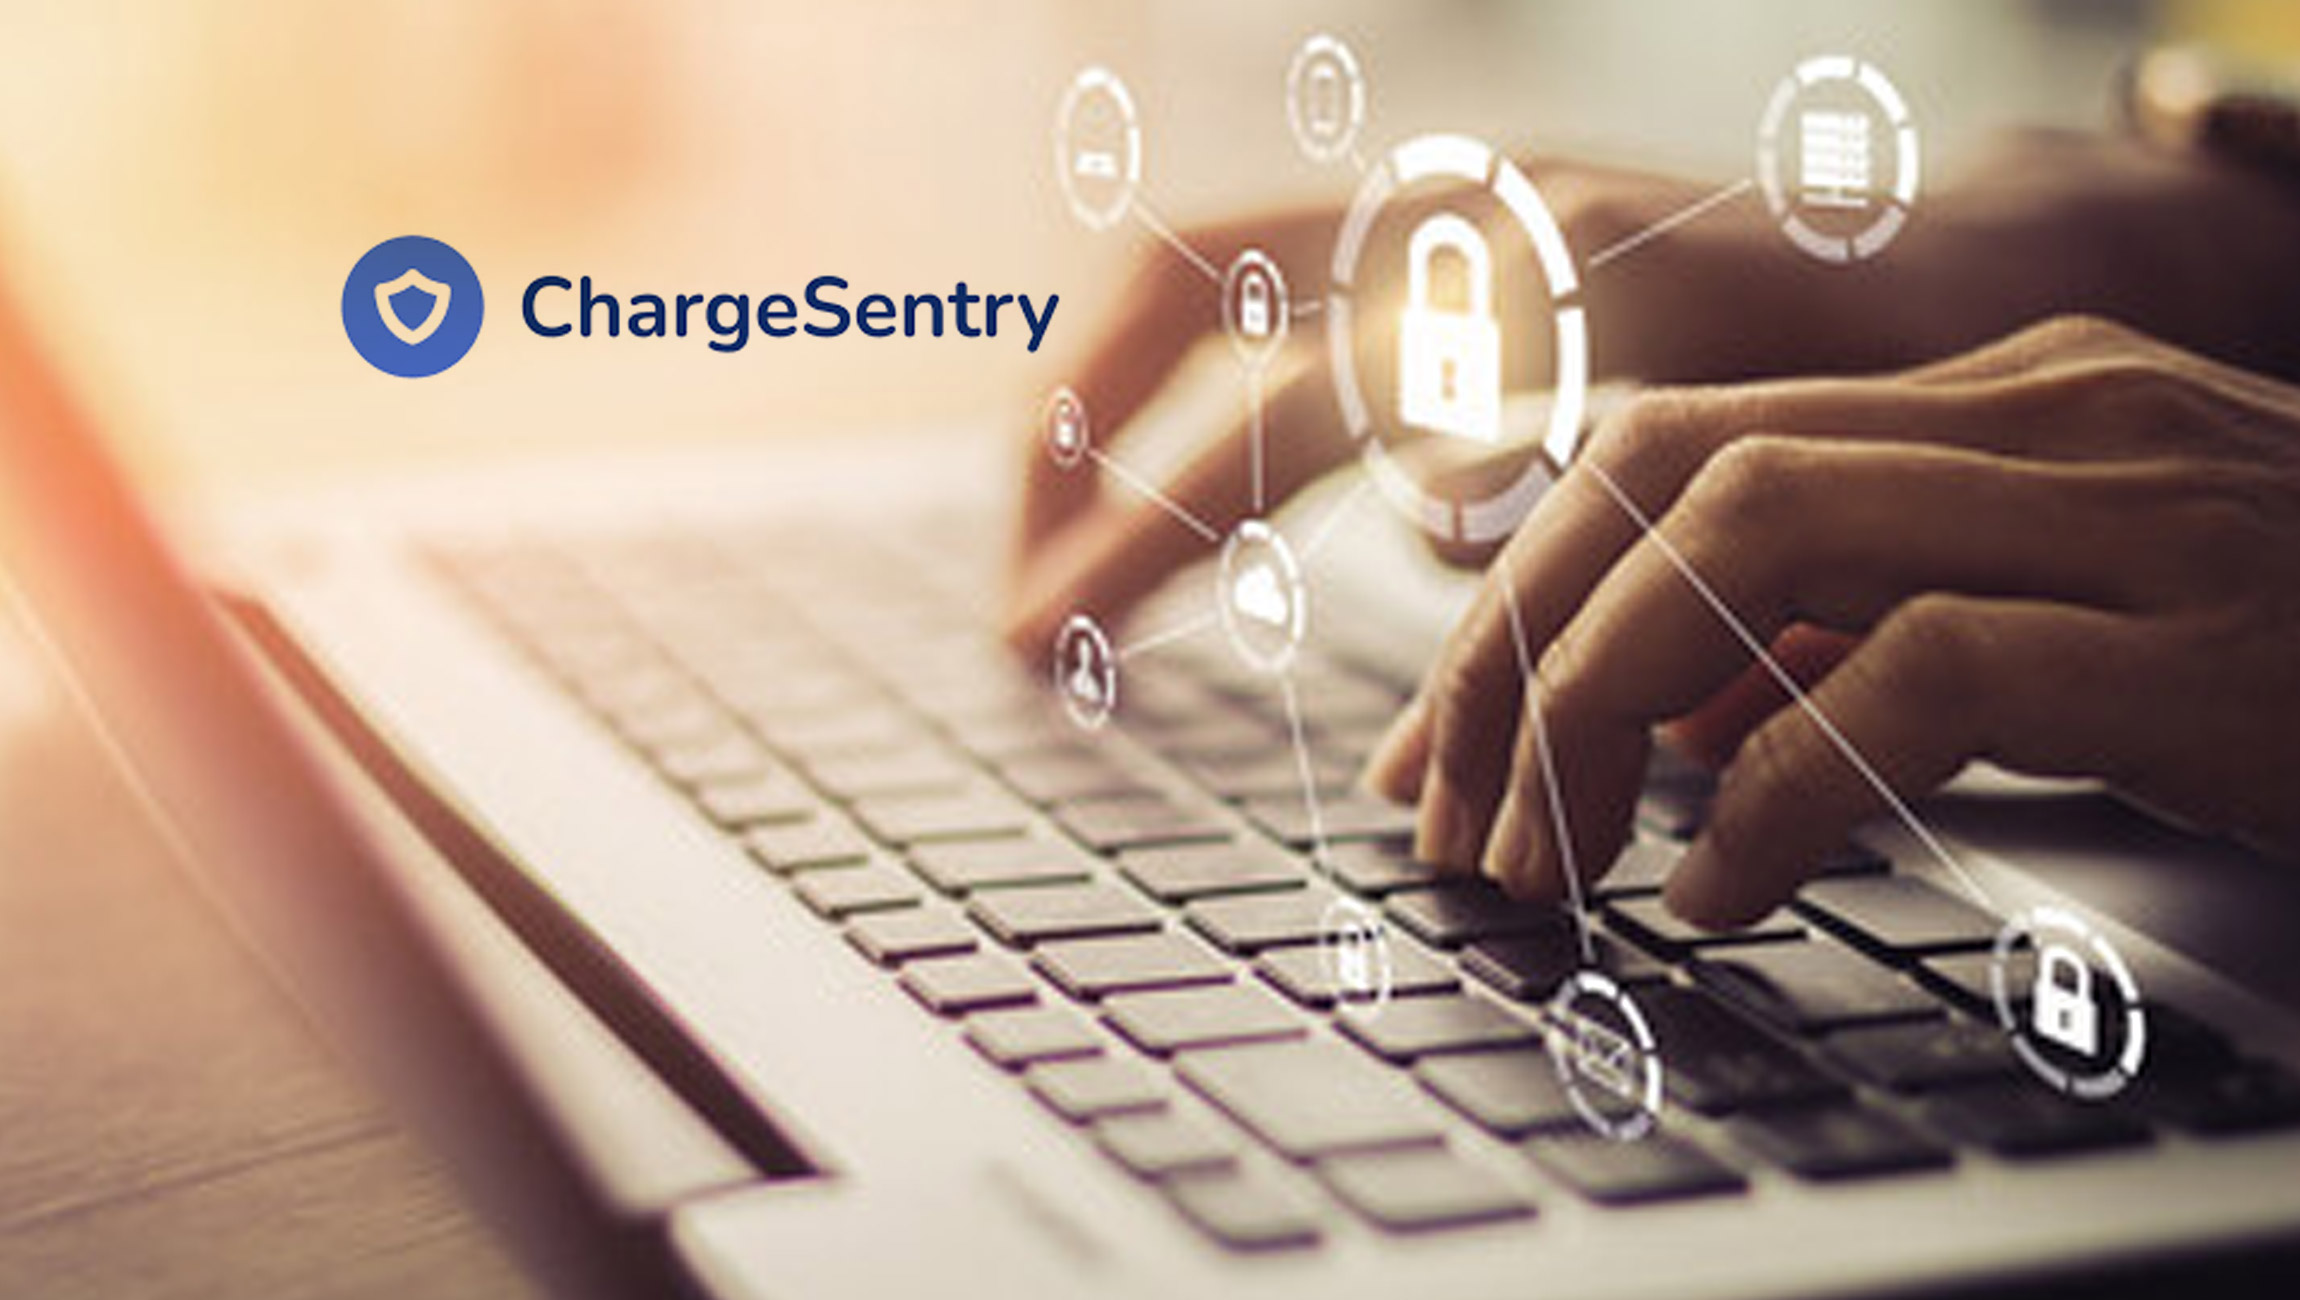 ChargeSentry-launches-their-chargeback-management-partner-program